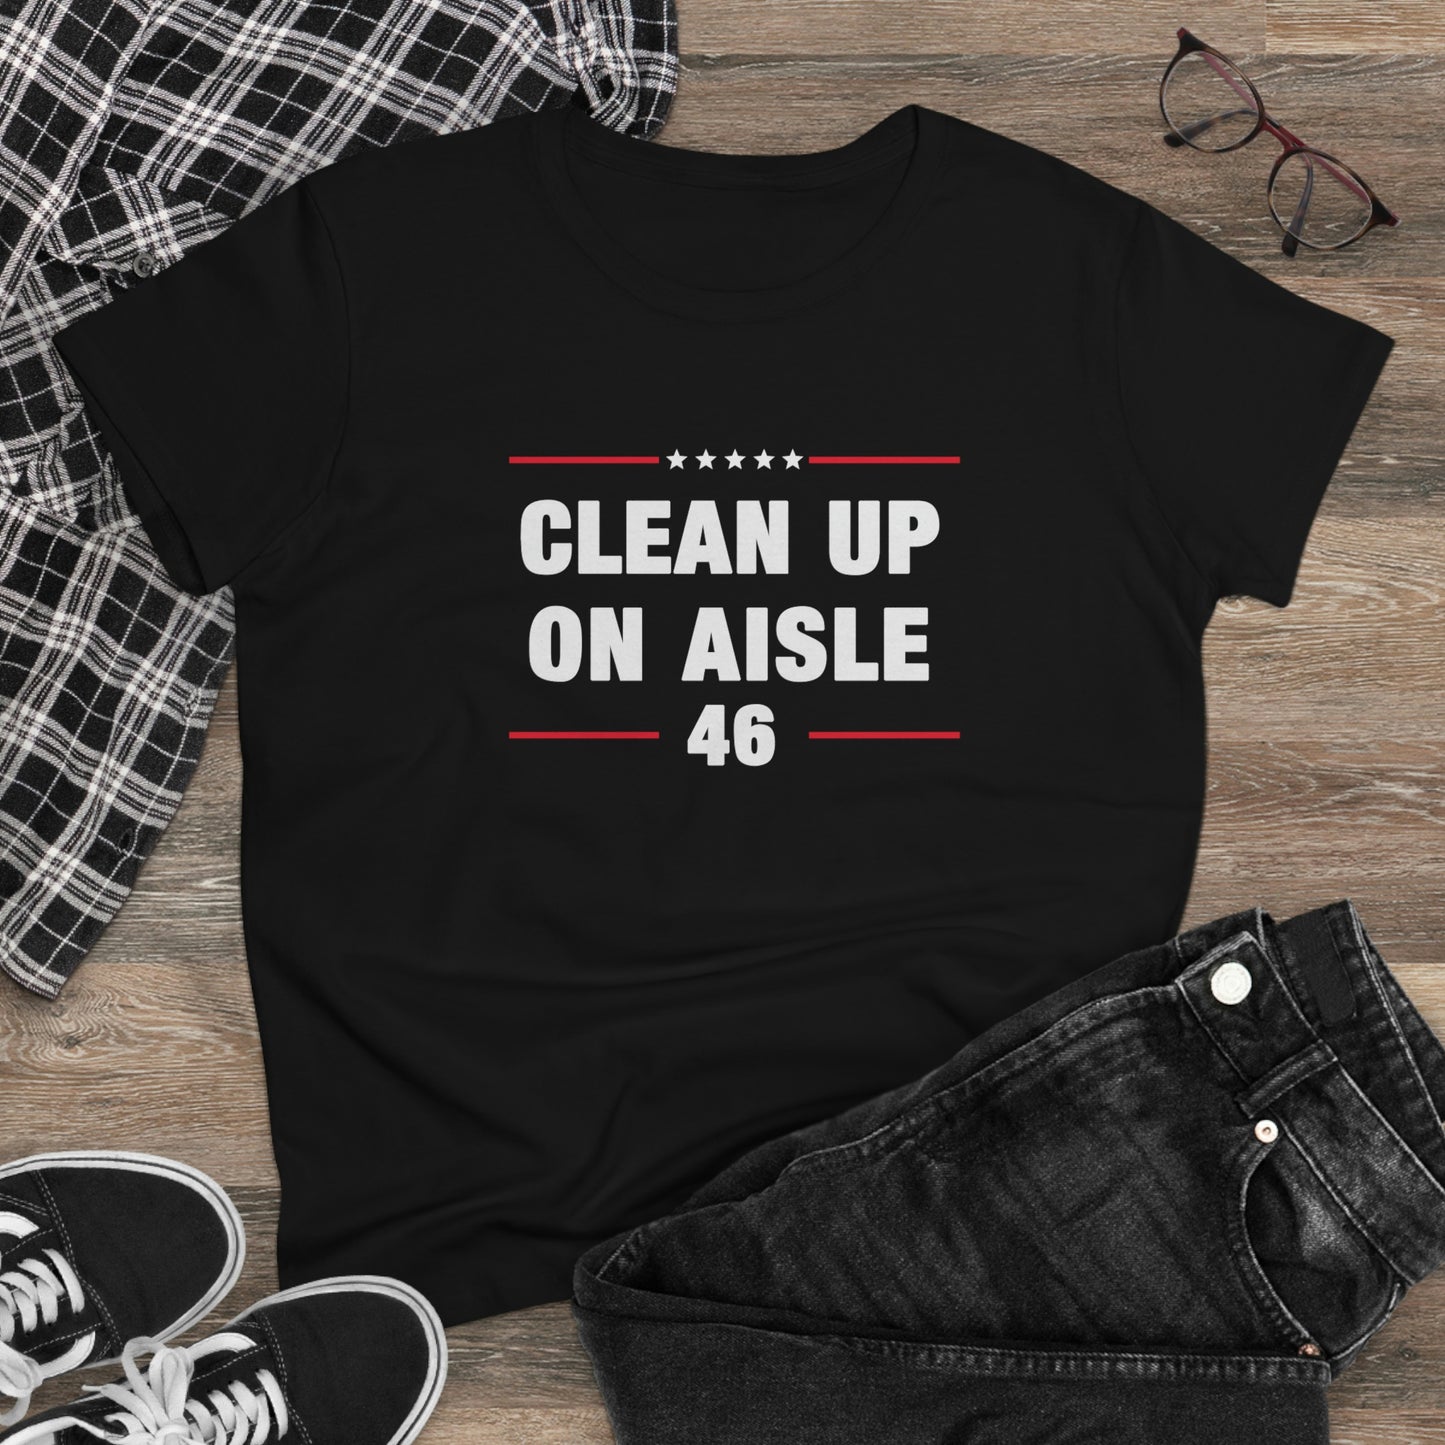 Clean Up on Aisle 46 | Women's Tee